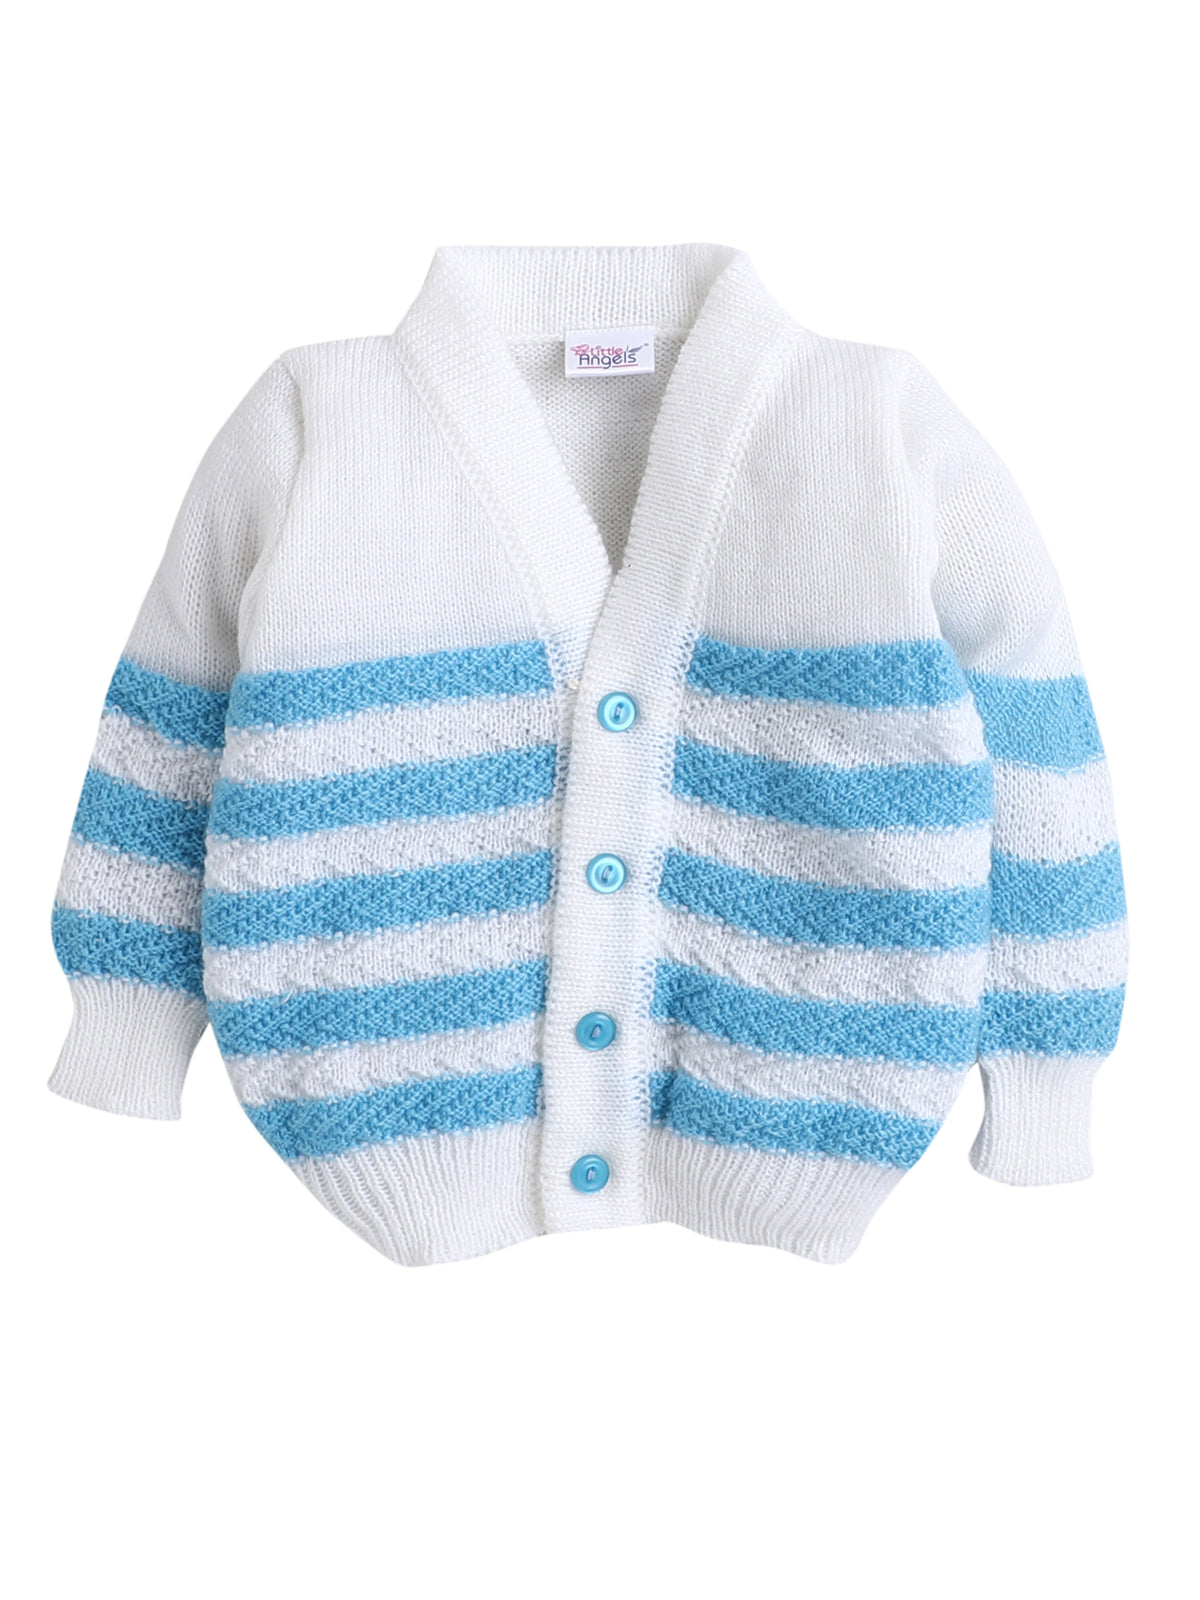 Full Sleeves Front Open Blue Color sweater with matching cap and socks for infants